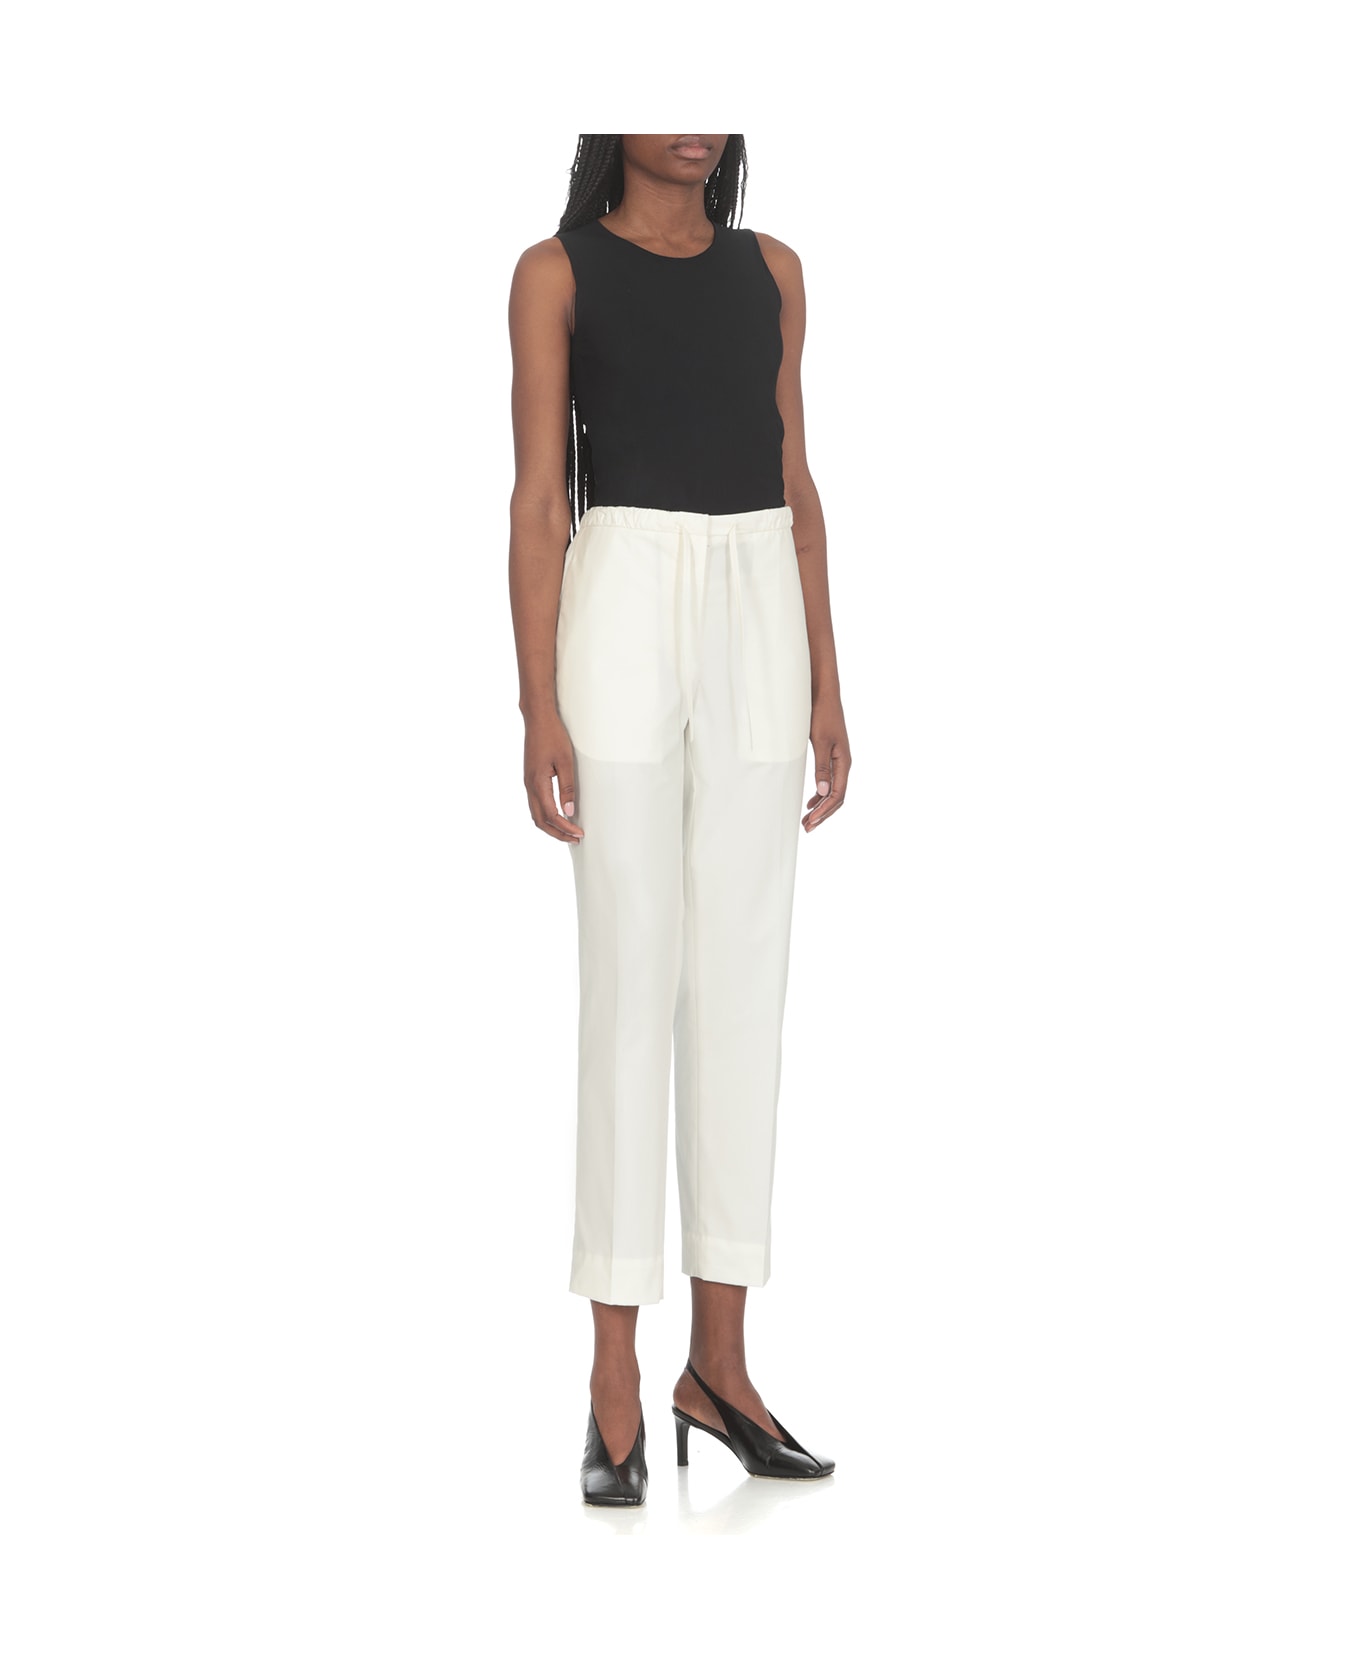 Jil Sander Cropped Cotton Trousers - Ivory ボトムス